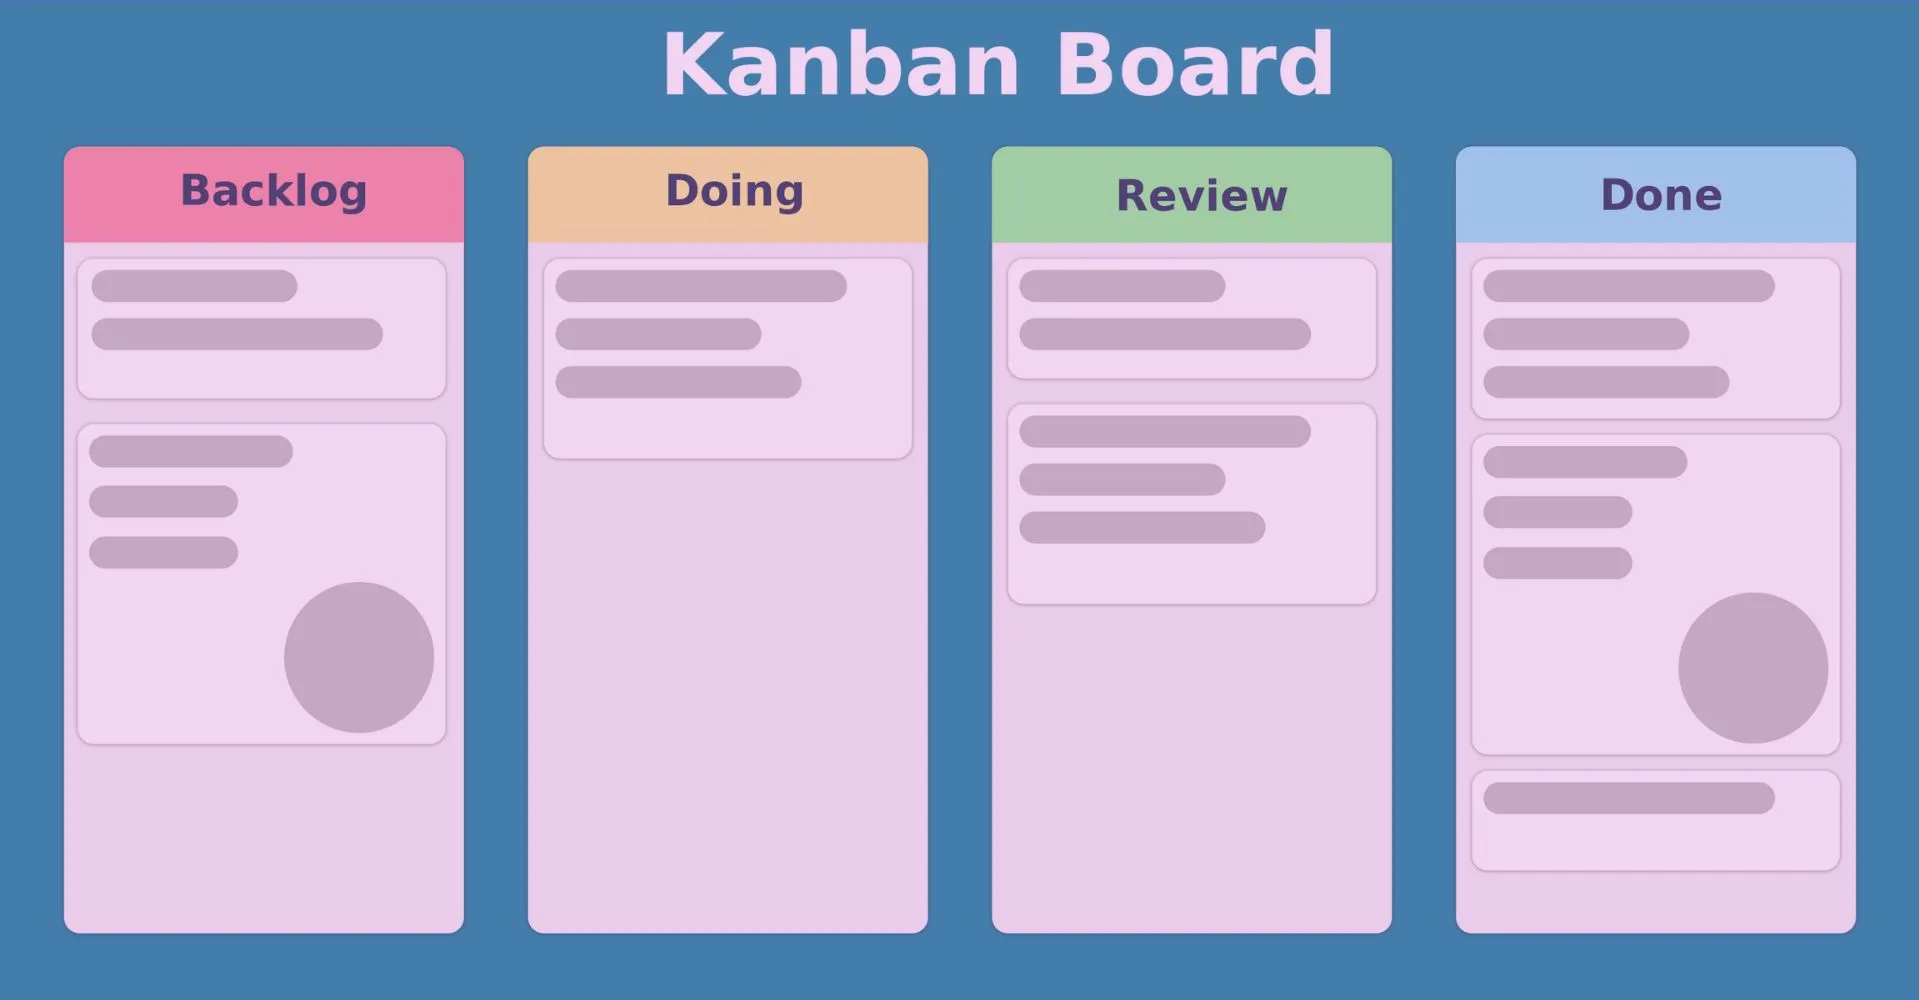 An animated image of a Kanban board. 